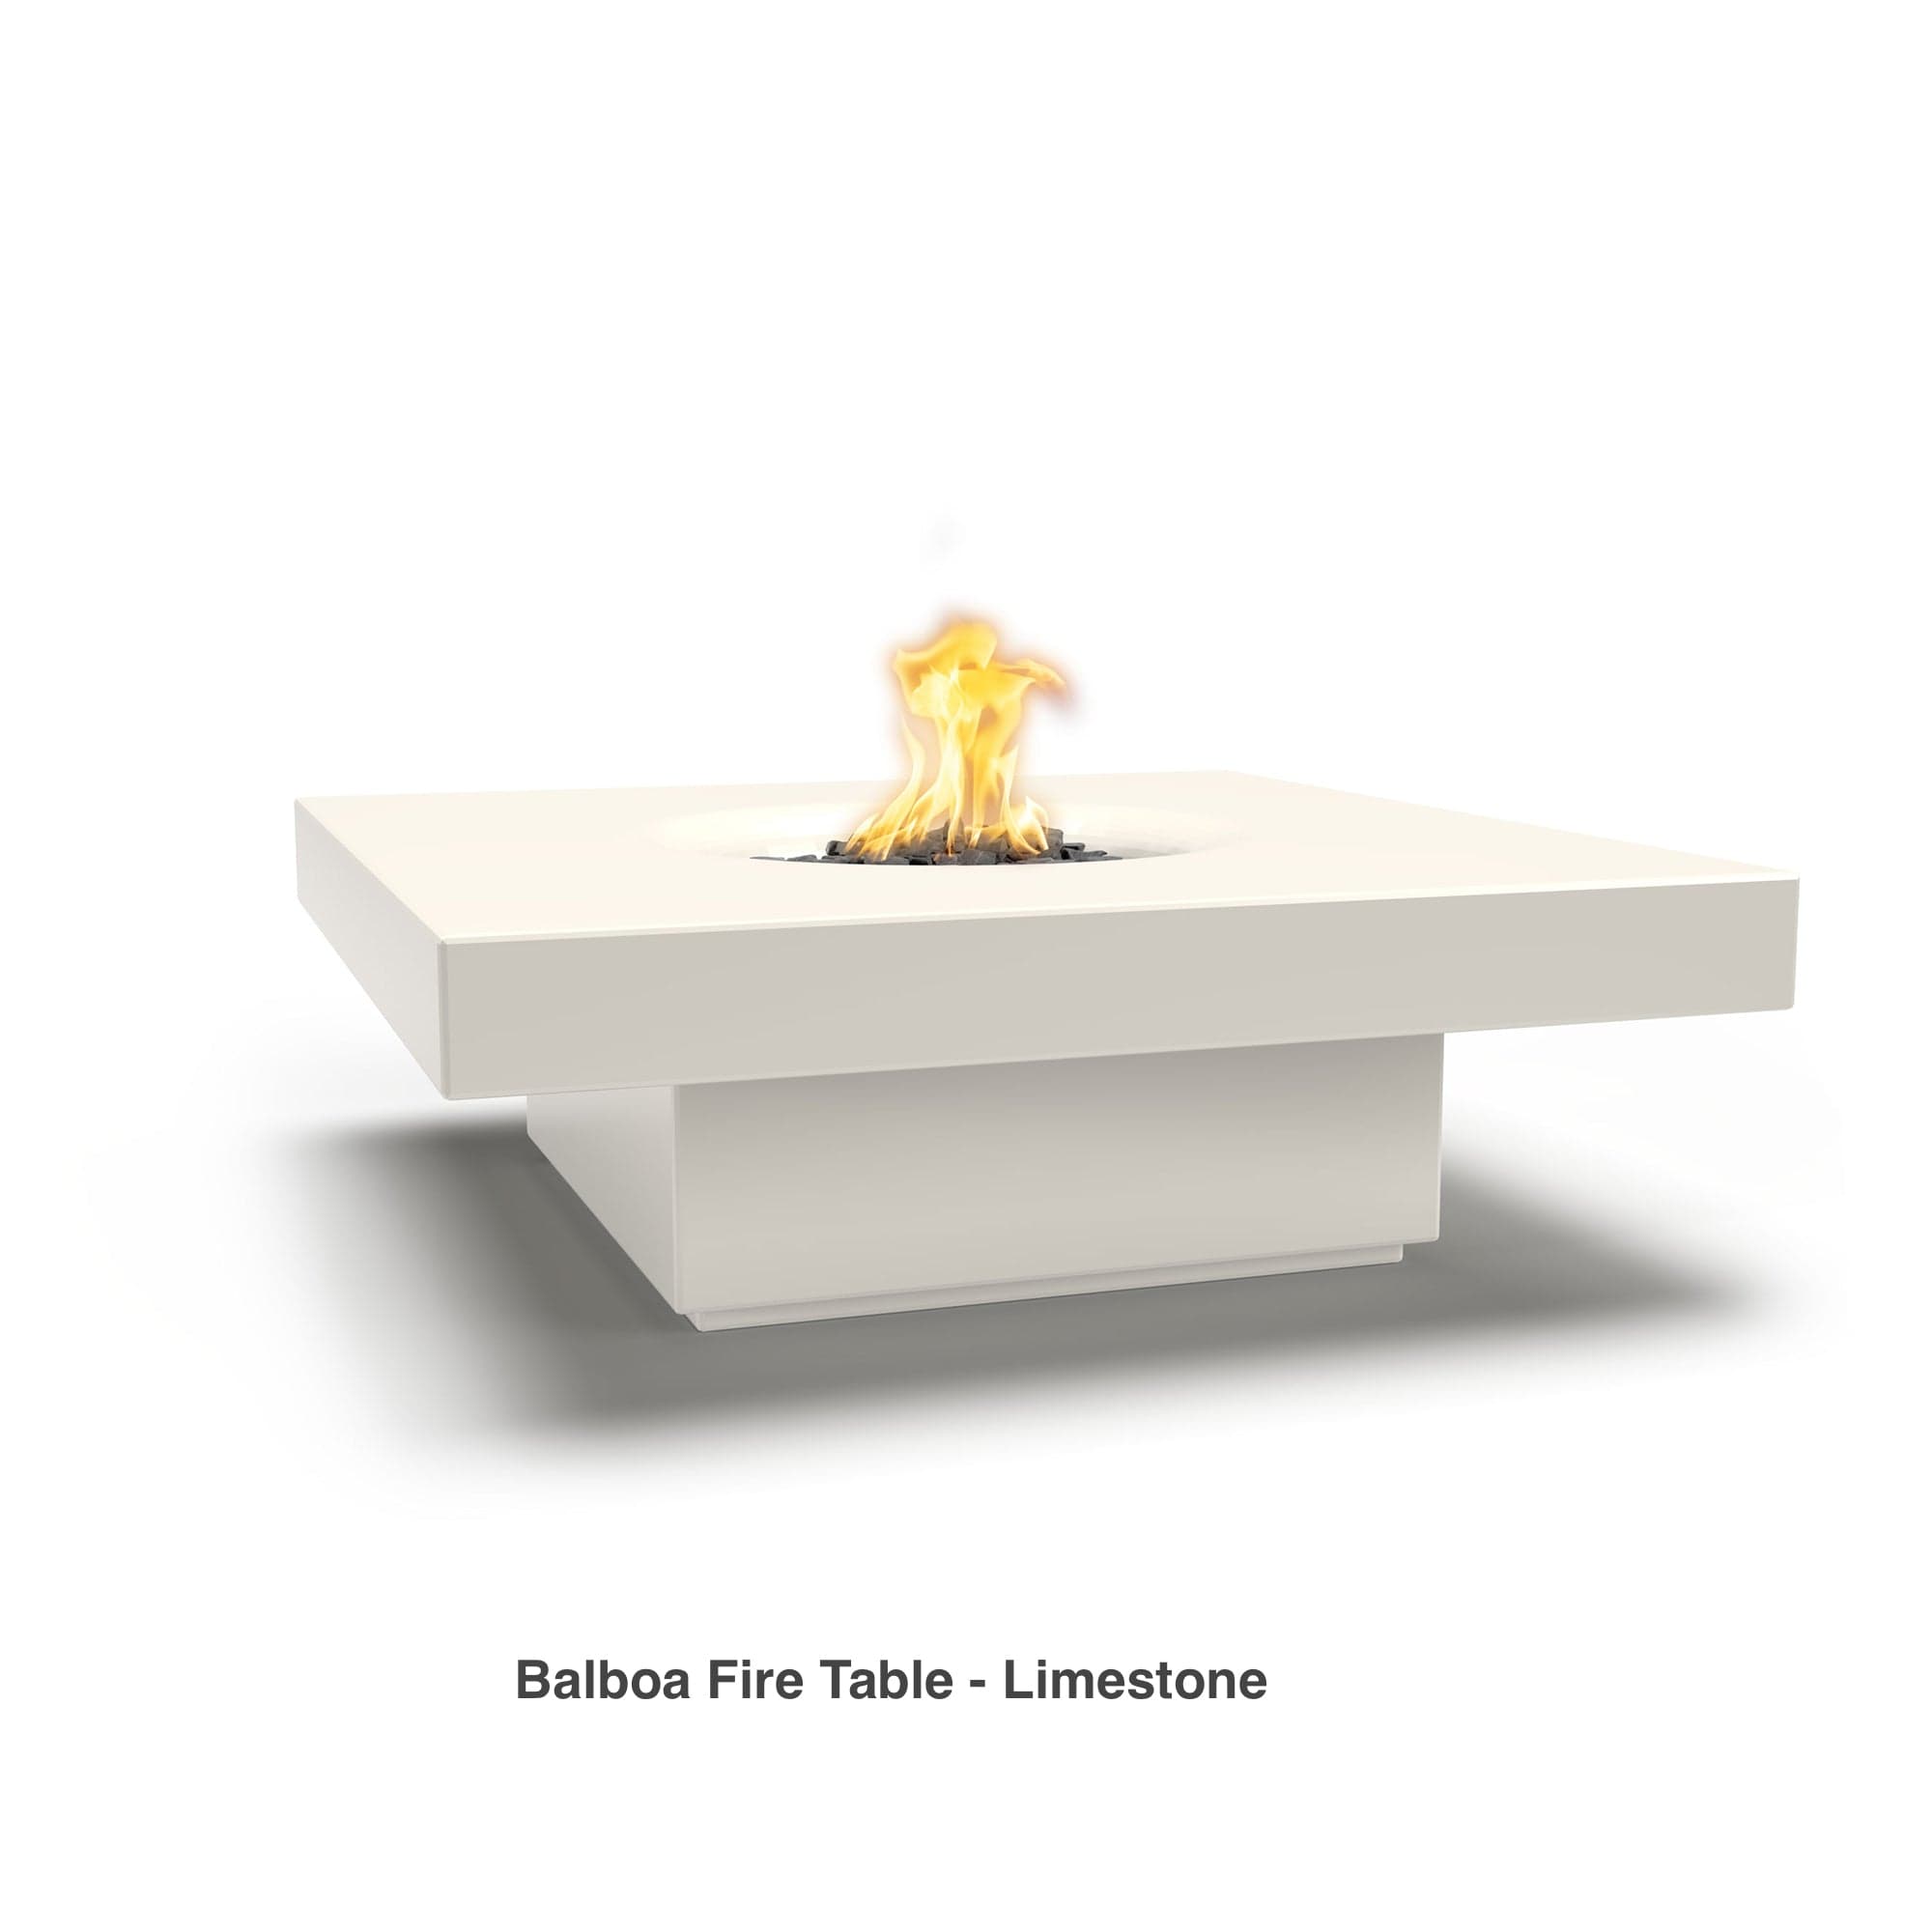 The Outdoor Plus Fire Features The Outdoor Plus 48" Square Balboa Fire Table - GFRC Concrete / OPT-BAL48, OPT-BAL48FSML, OPT-BAL48FSEN, OPT-BAL48E12V, OPT-BAL48EKIT